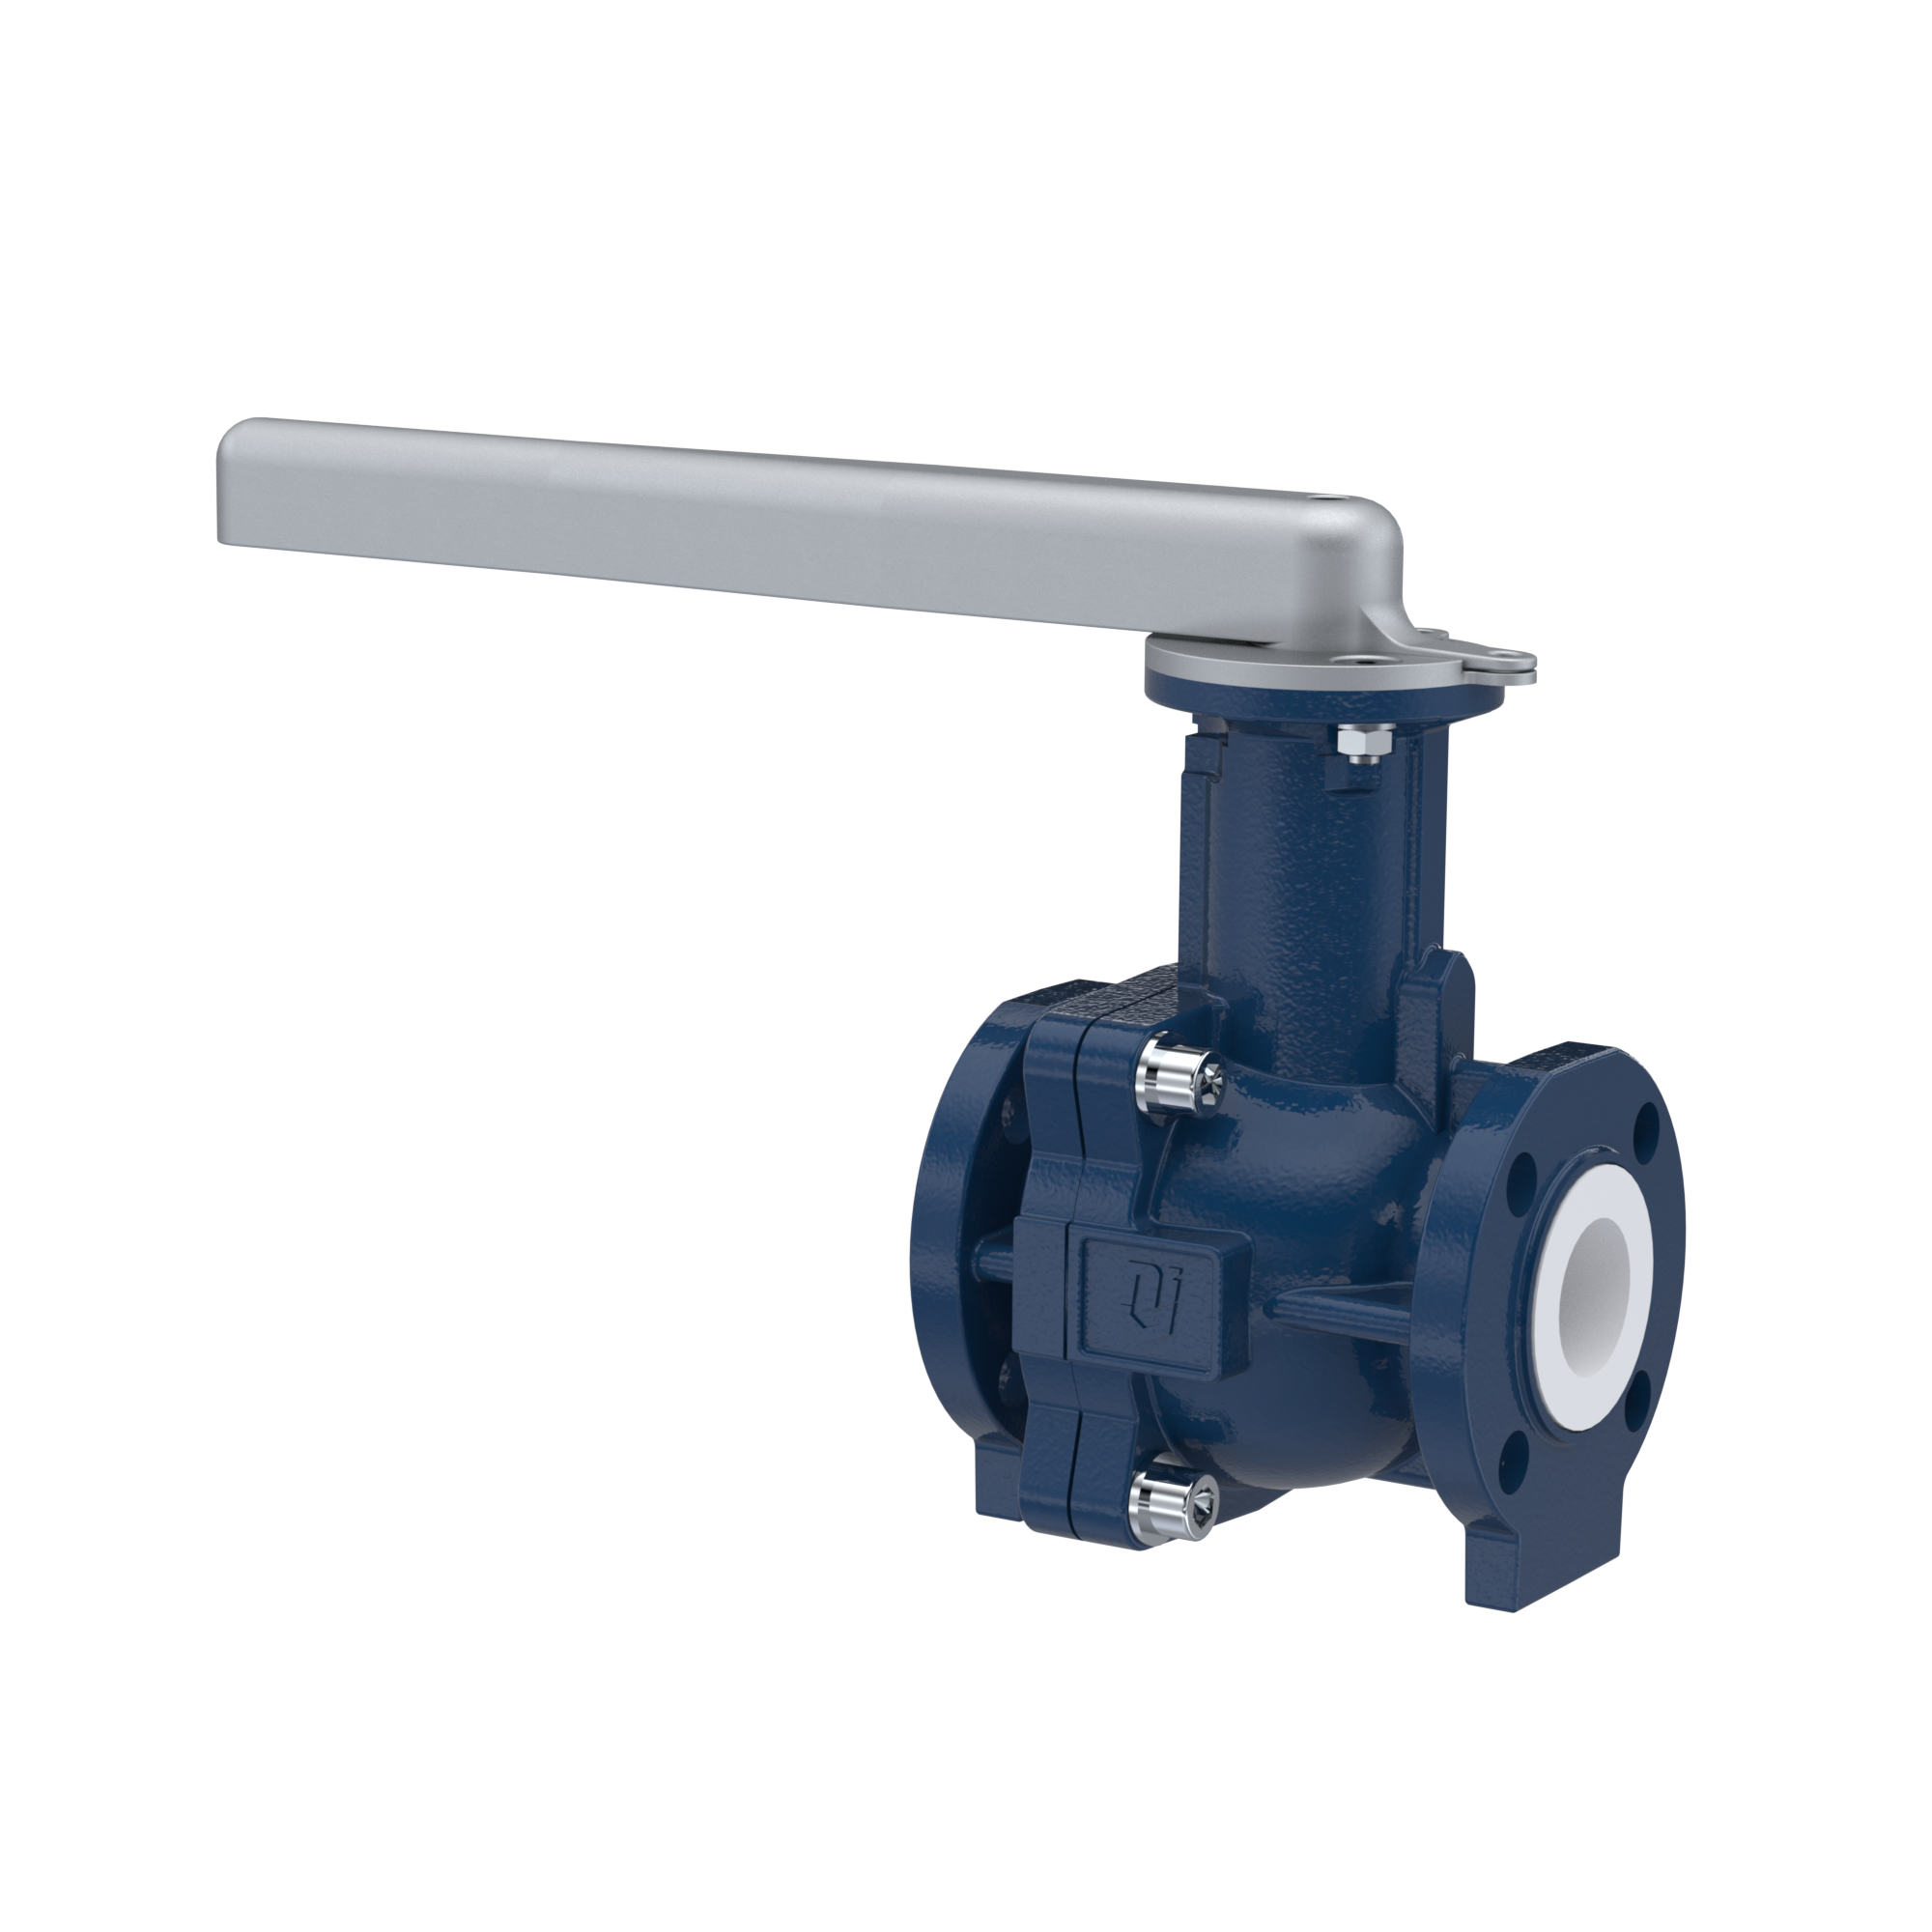 PFA-flange ball valve FK13 DN20 - 3/4" inch ANSI 150 made of spheroidal graphite cast iron with lever hand